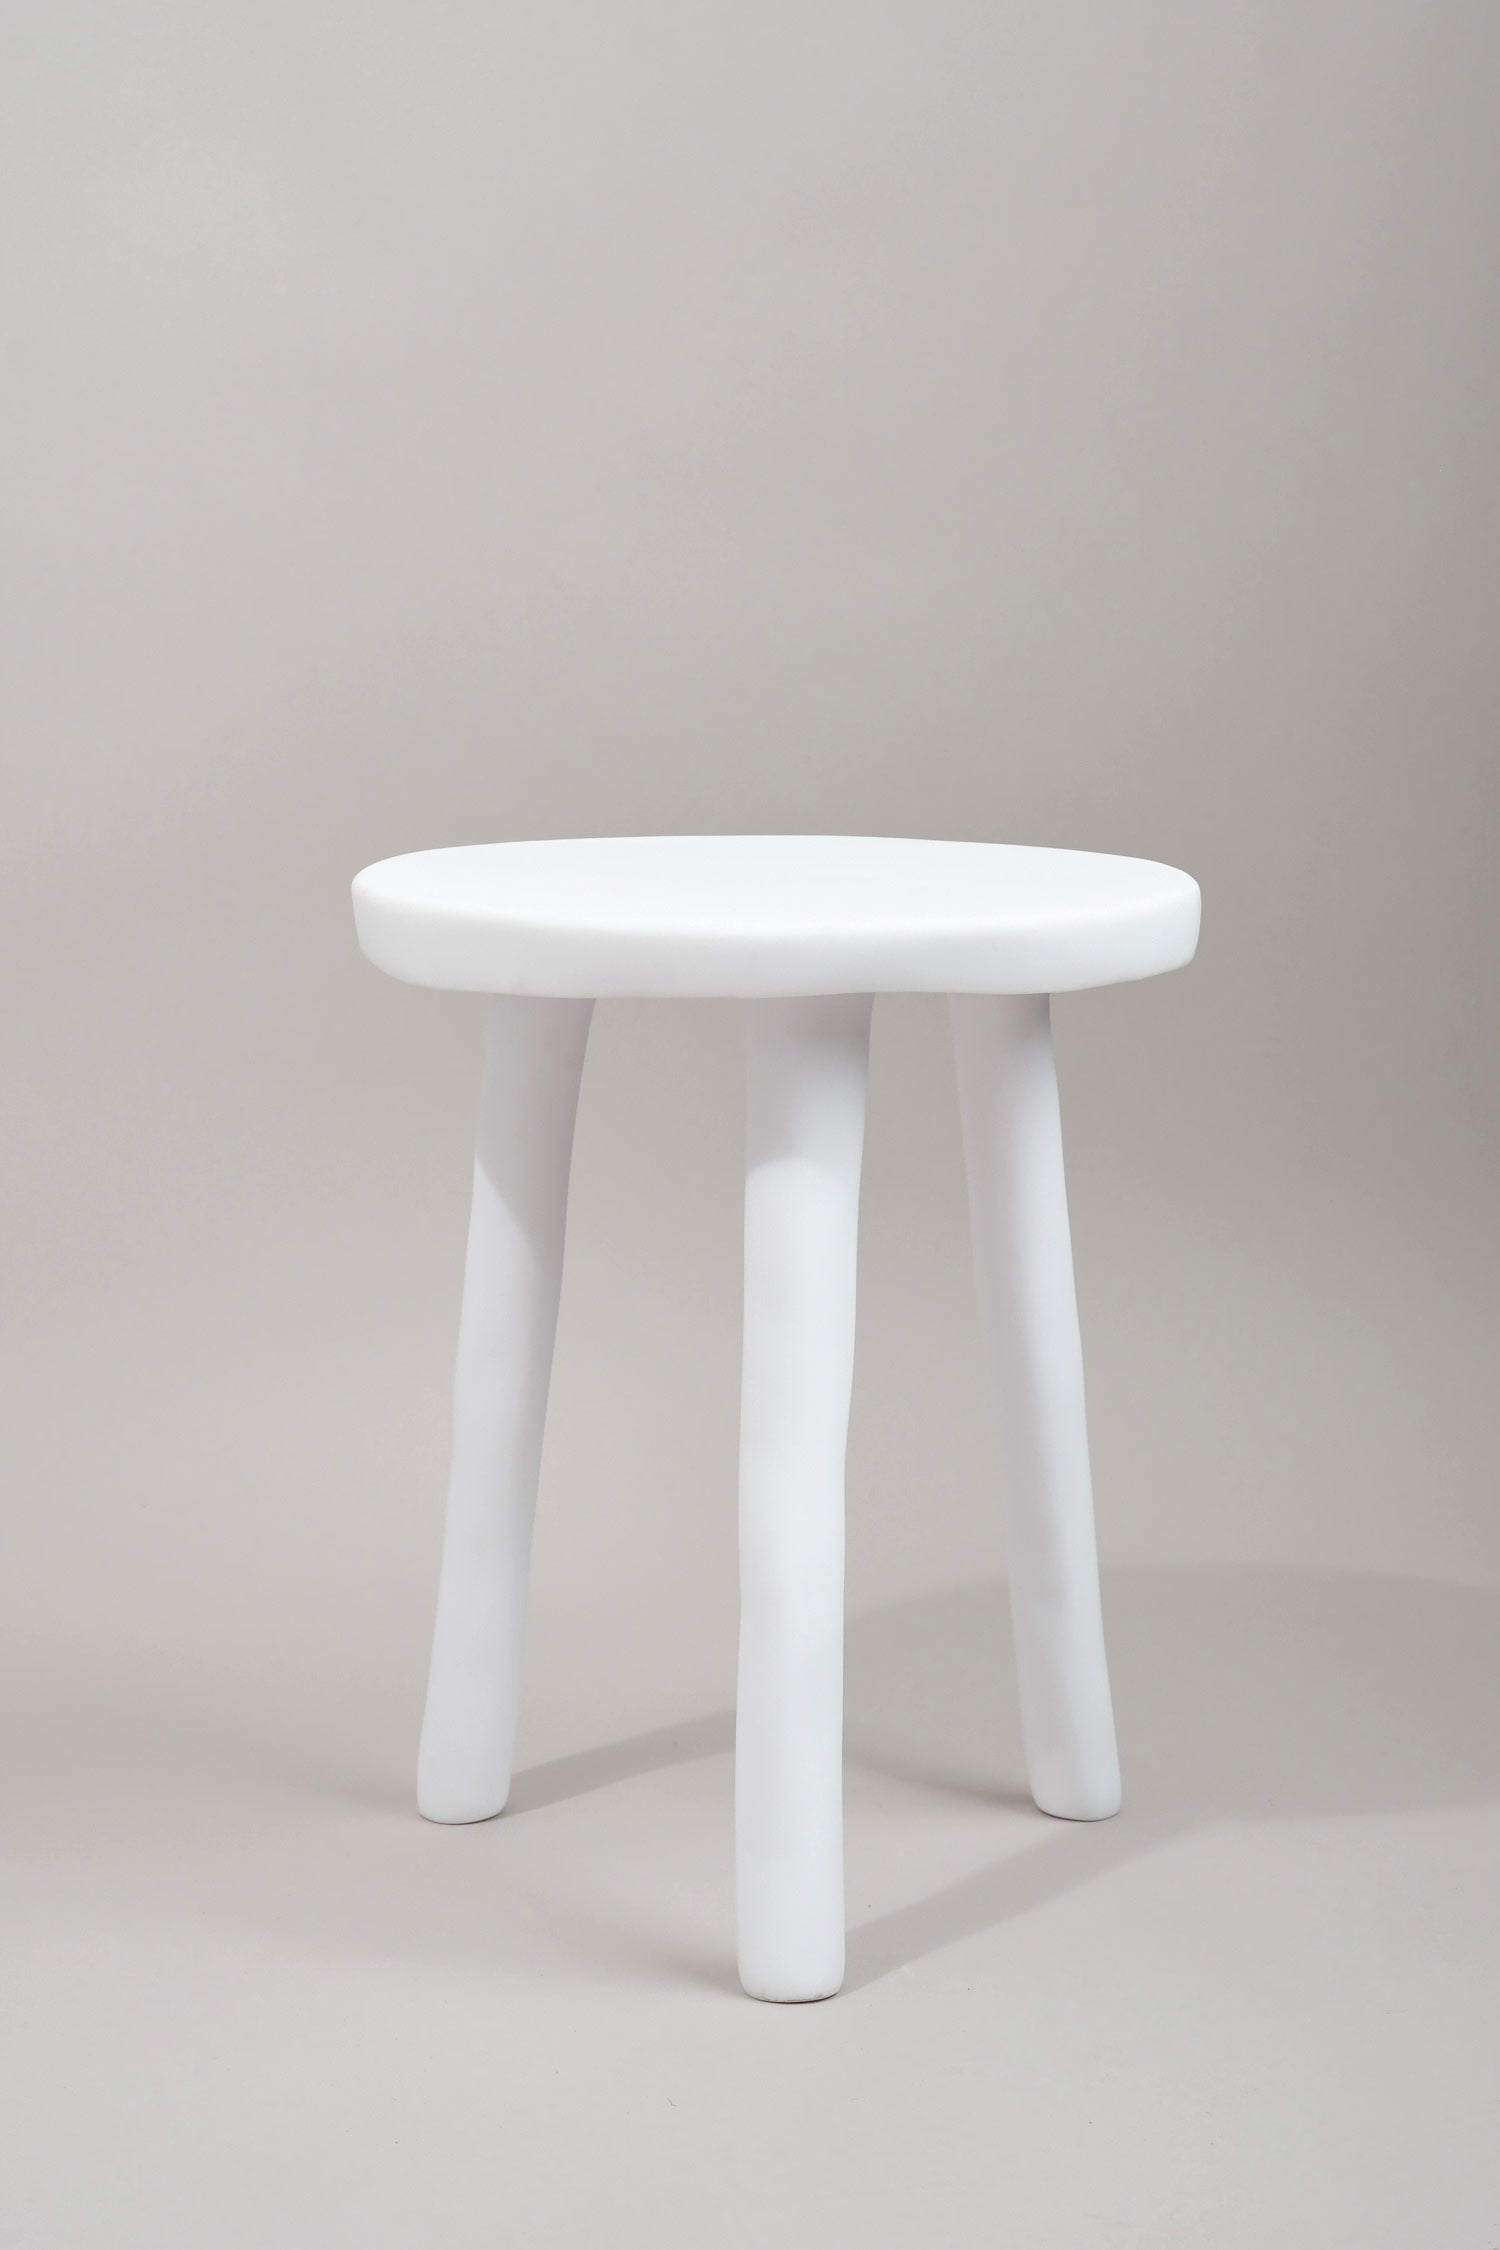 Side Table in White Tina Frey Designs